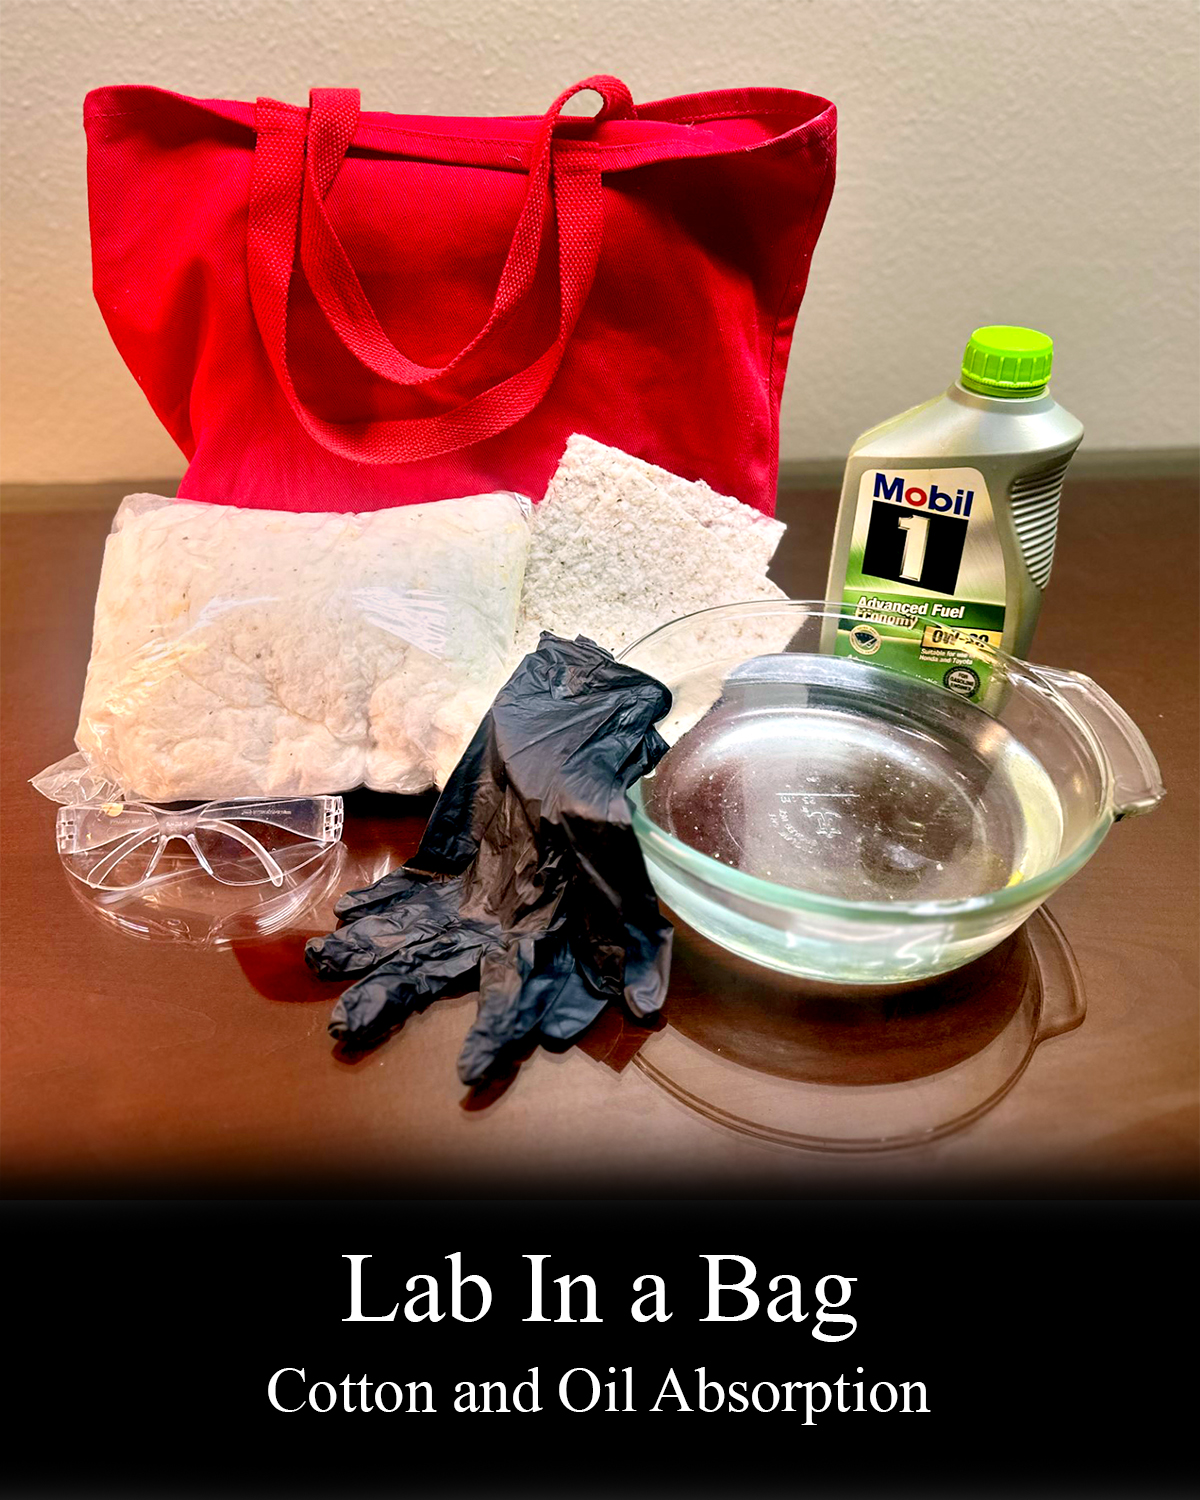 Lab in a bag showcases sustainability